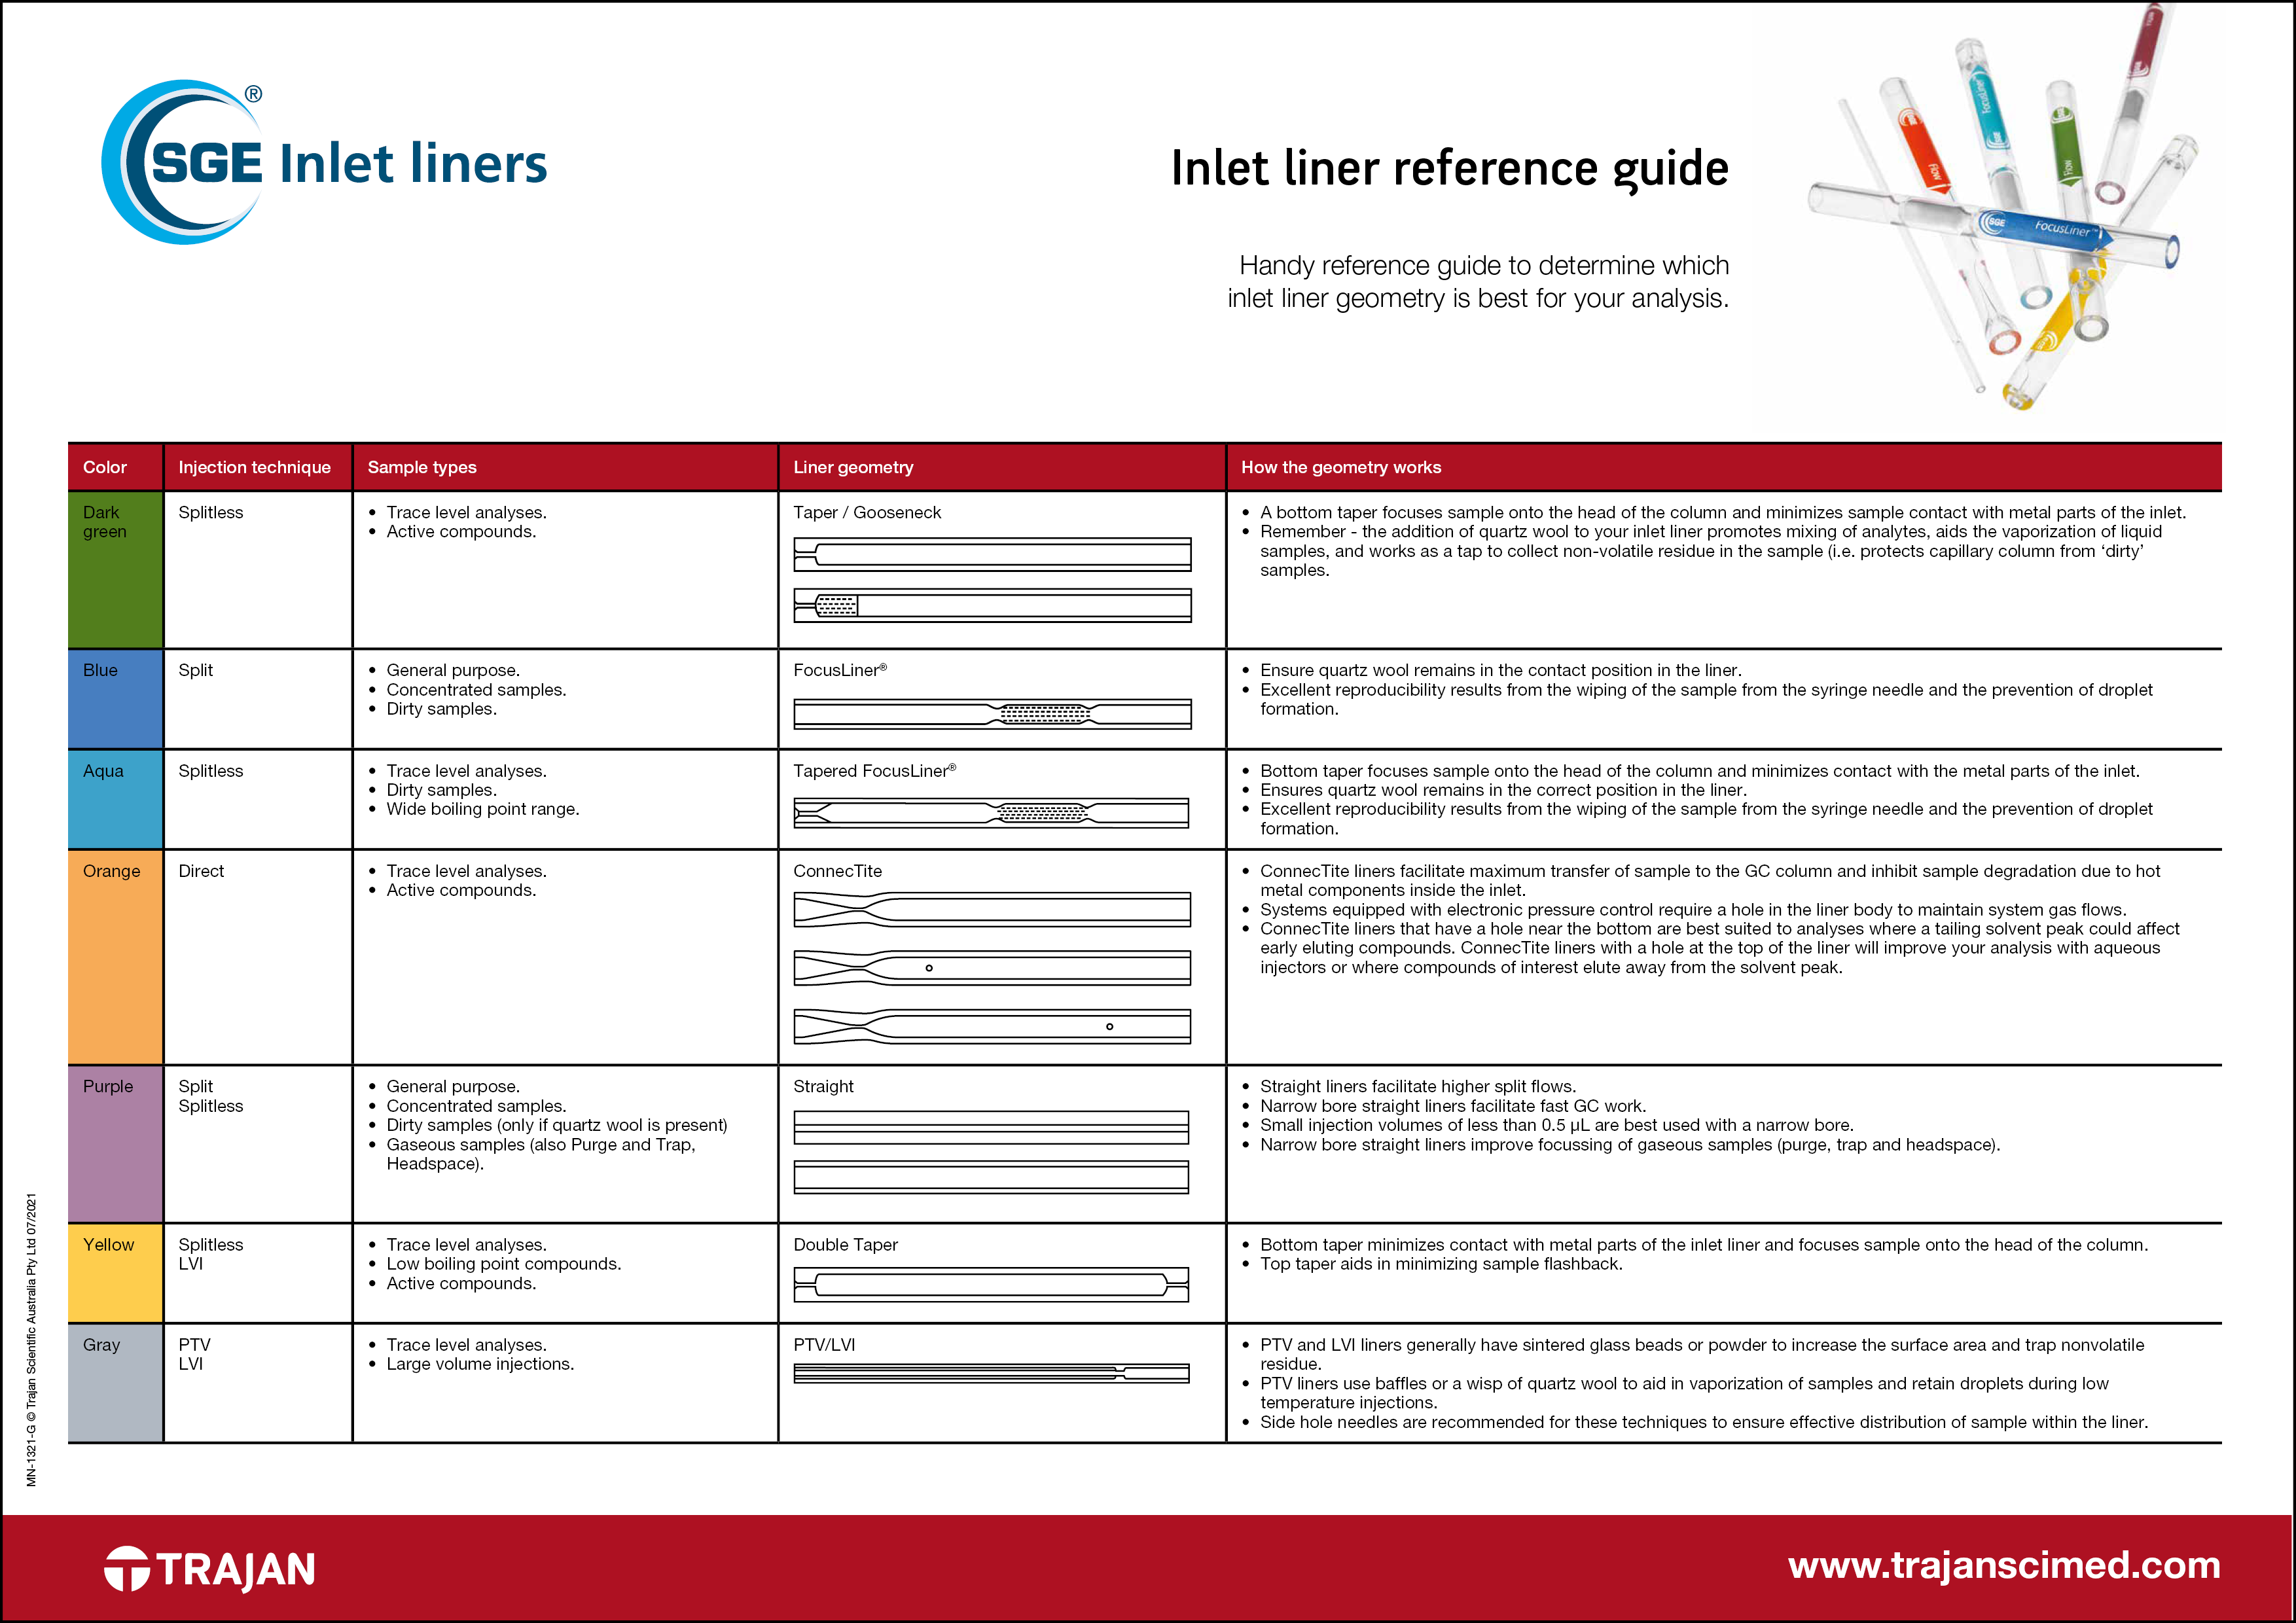 Inlet liner reference guide